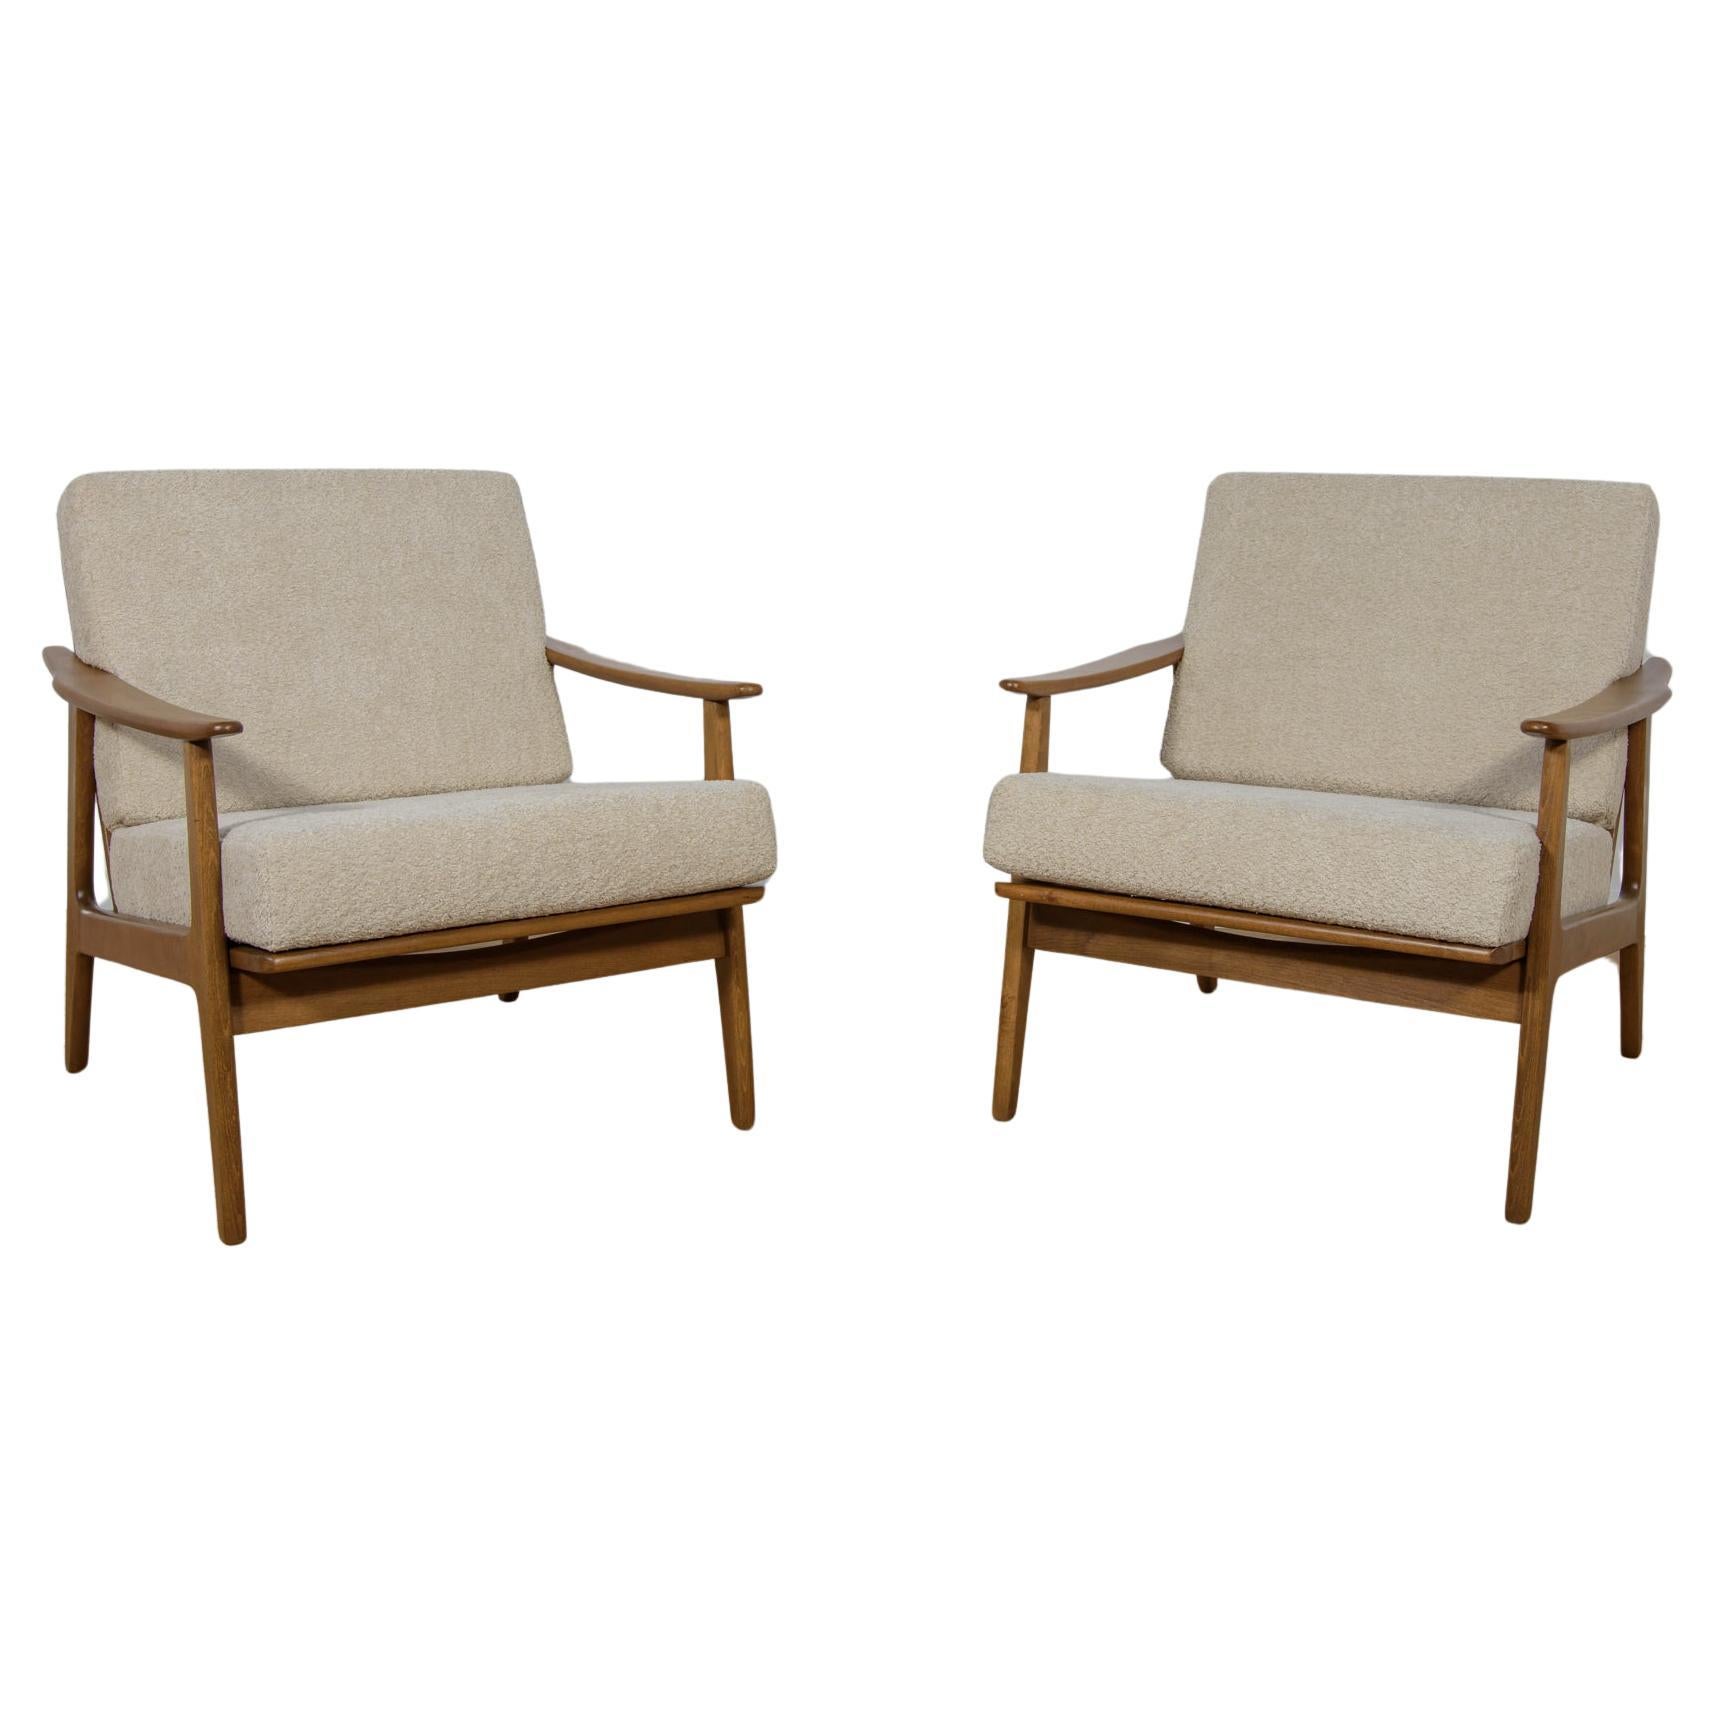  Mid Century Polish Armchairs Model 5825, 1960s, set of 2 For Sale